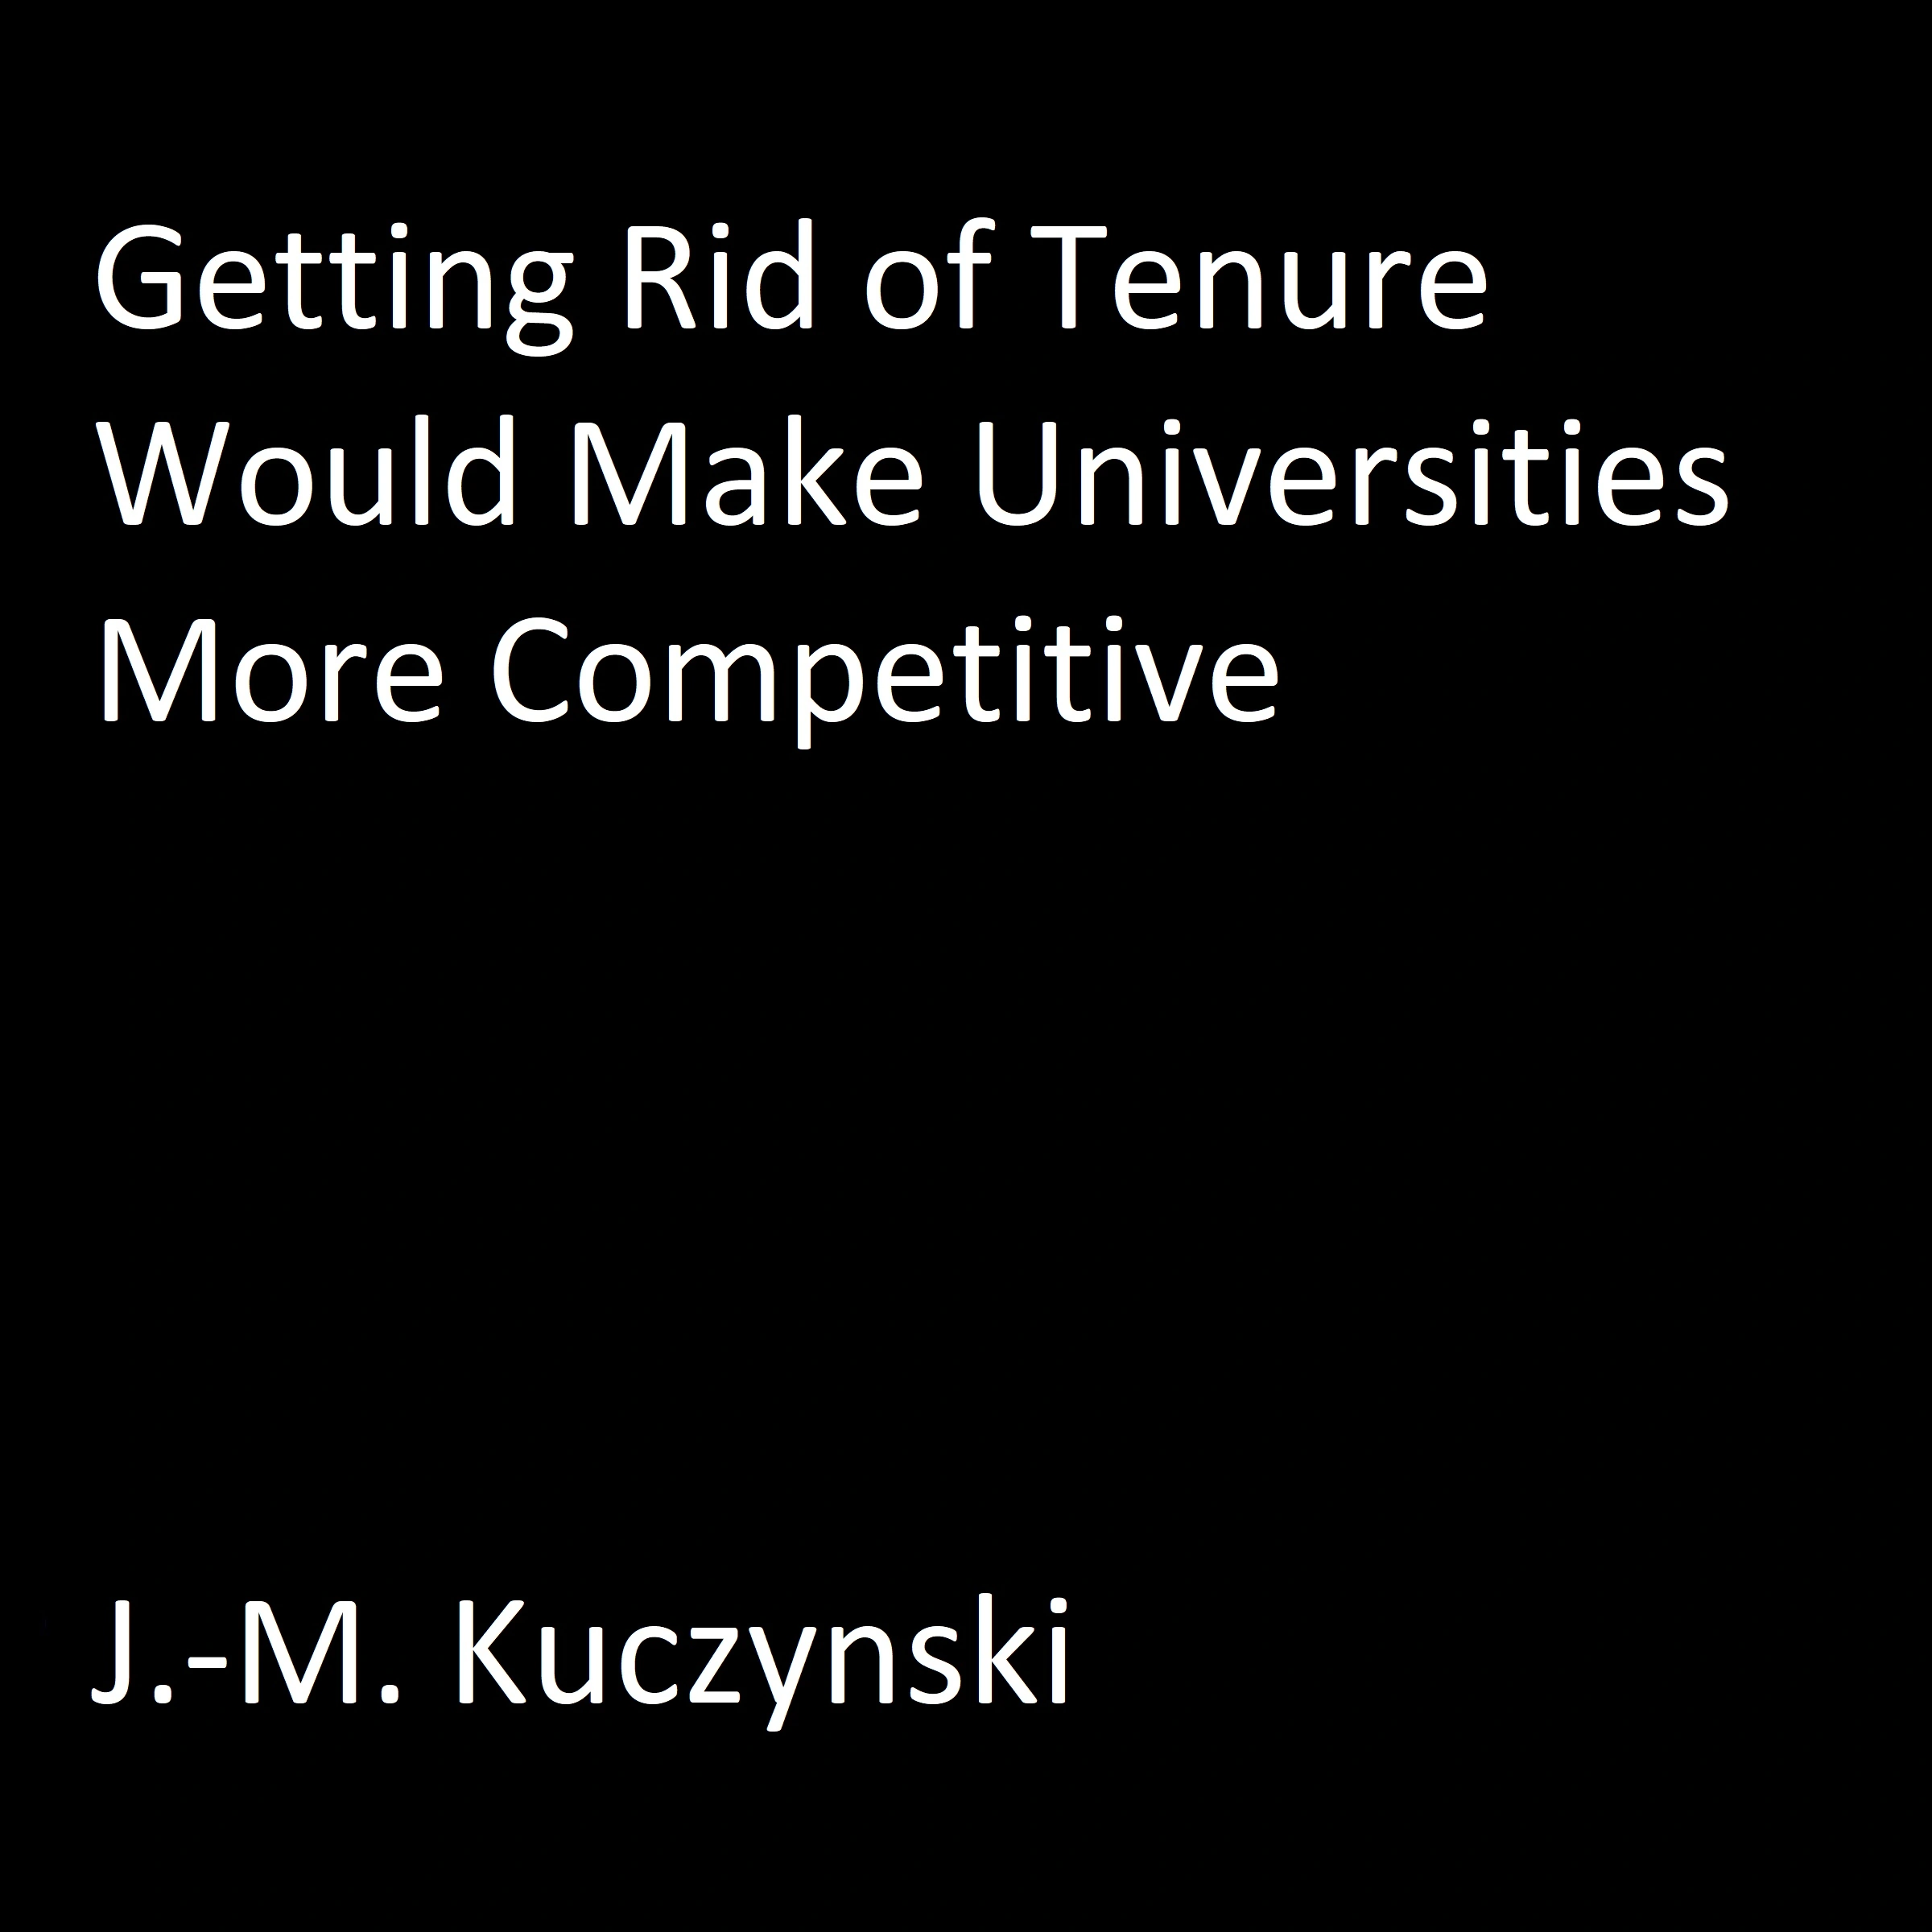 Getting Rid of Tenure Would Make Universities More Competitive Audiobook by J.-M. Kuczynski